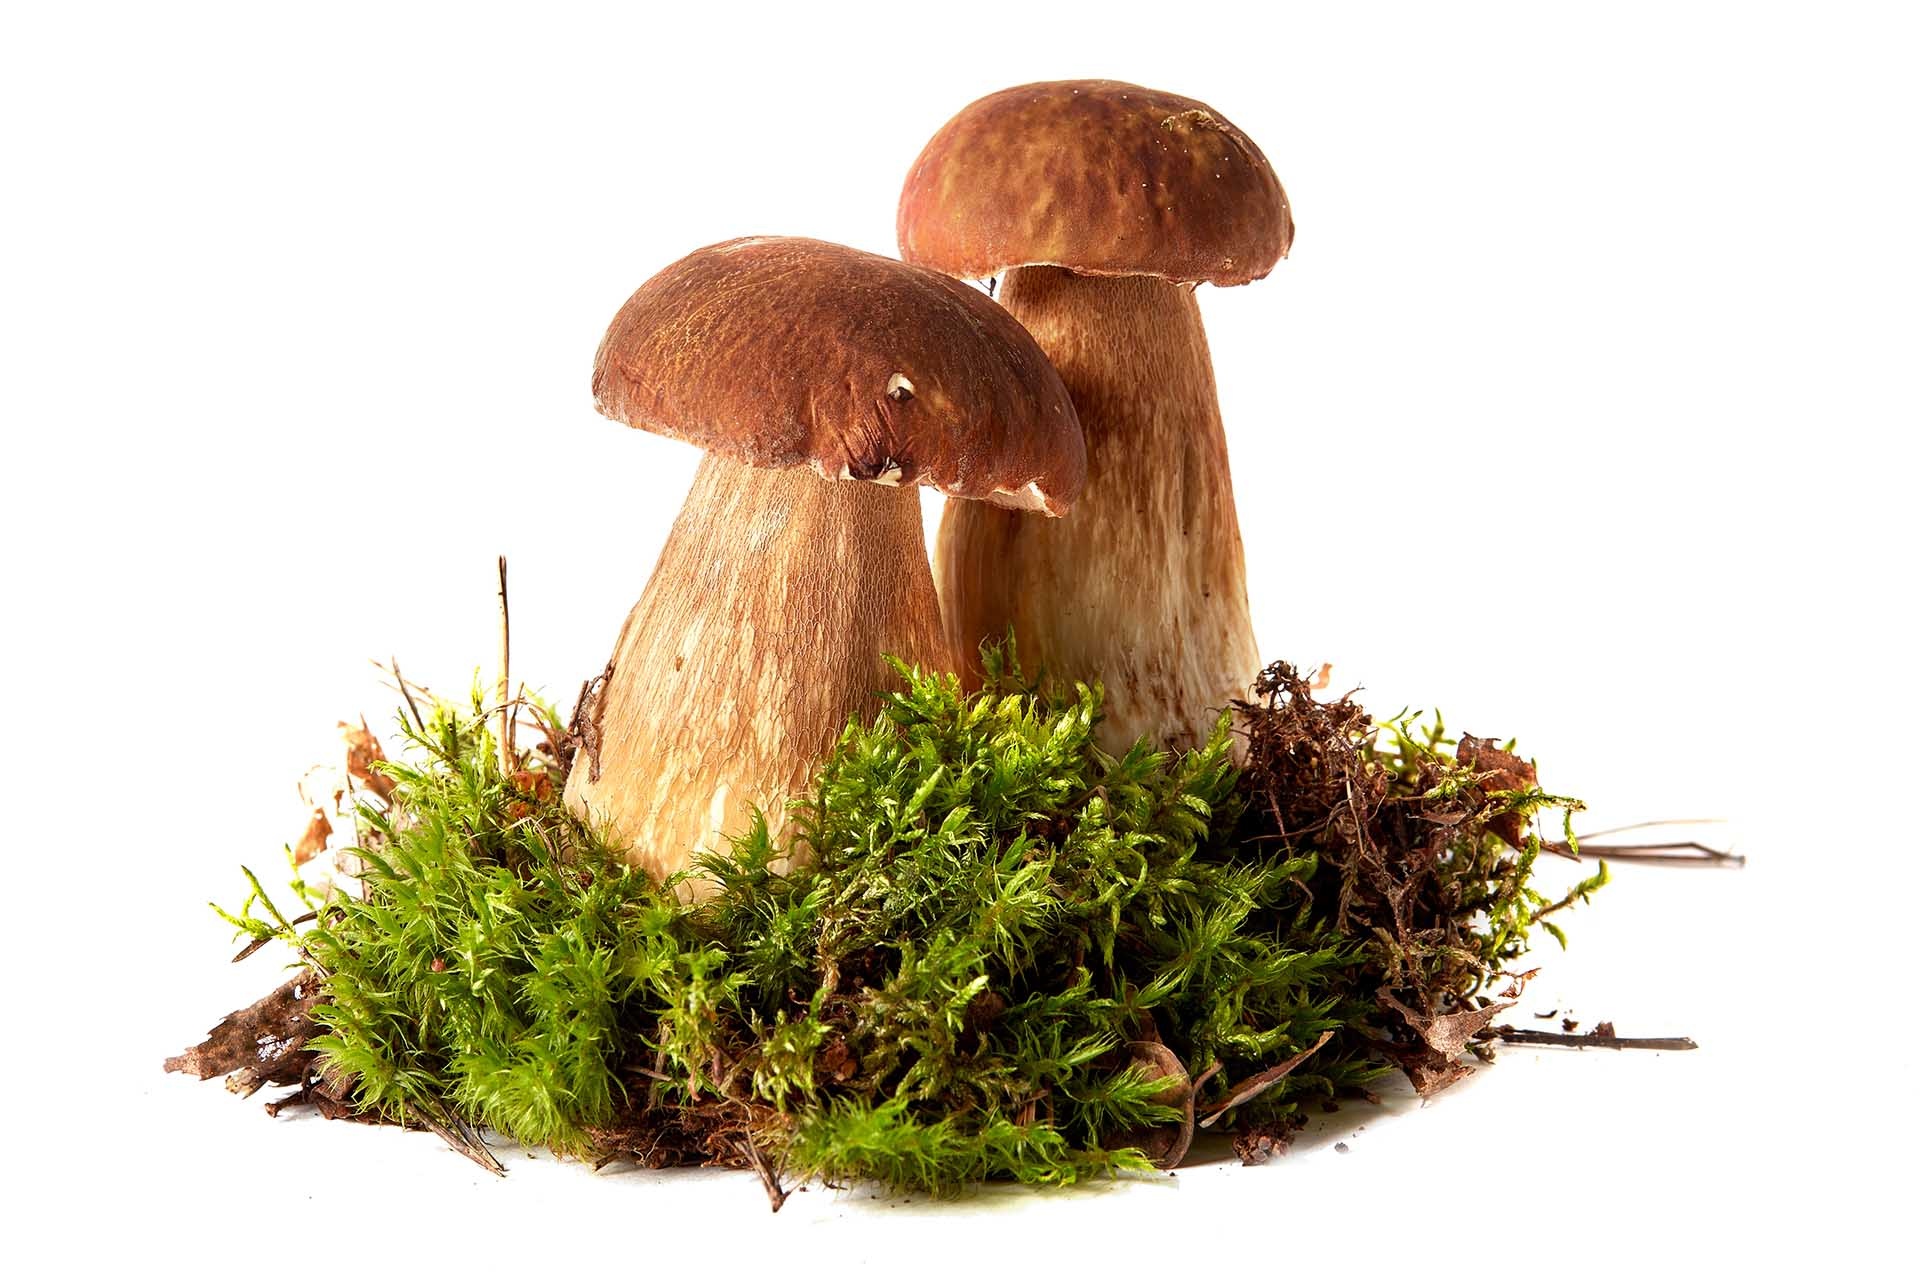 Modima products, Gourmet delights, Mushroom perfection, Culinary excellence, 1920x1280 HD Desktop